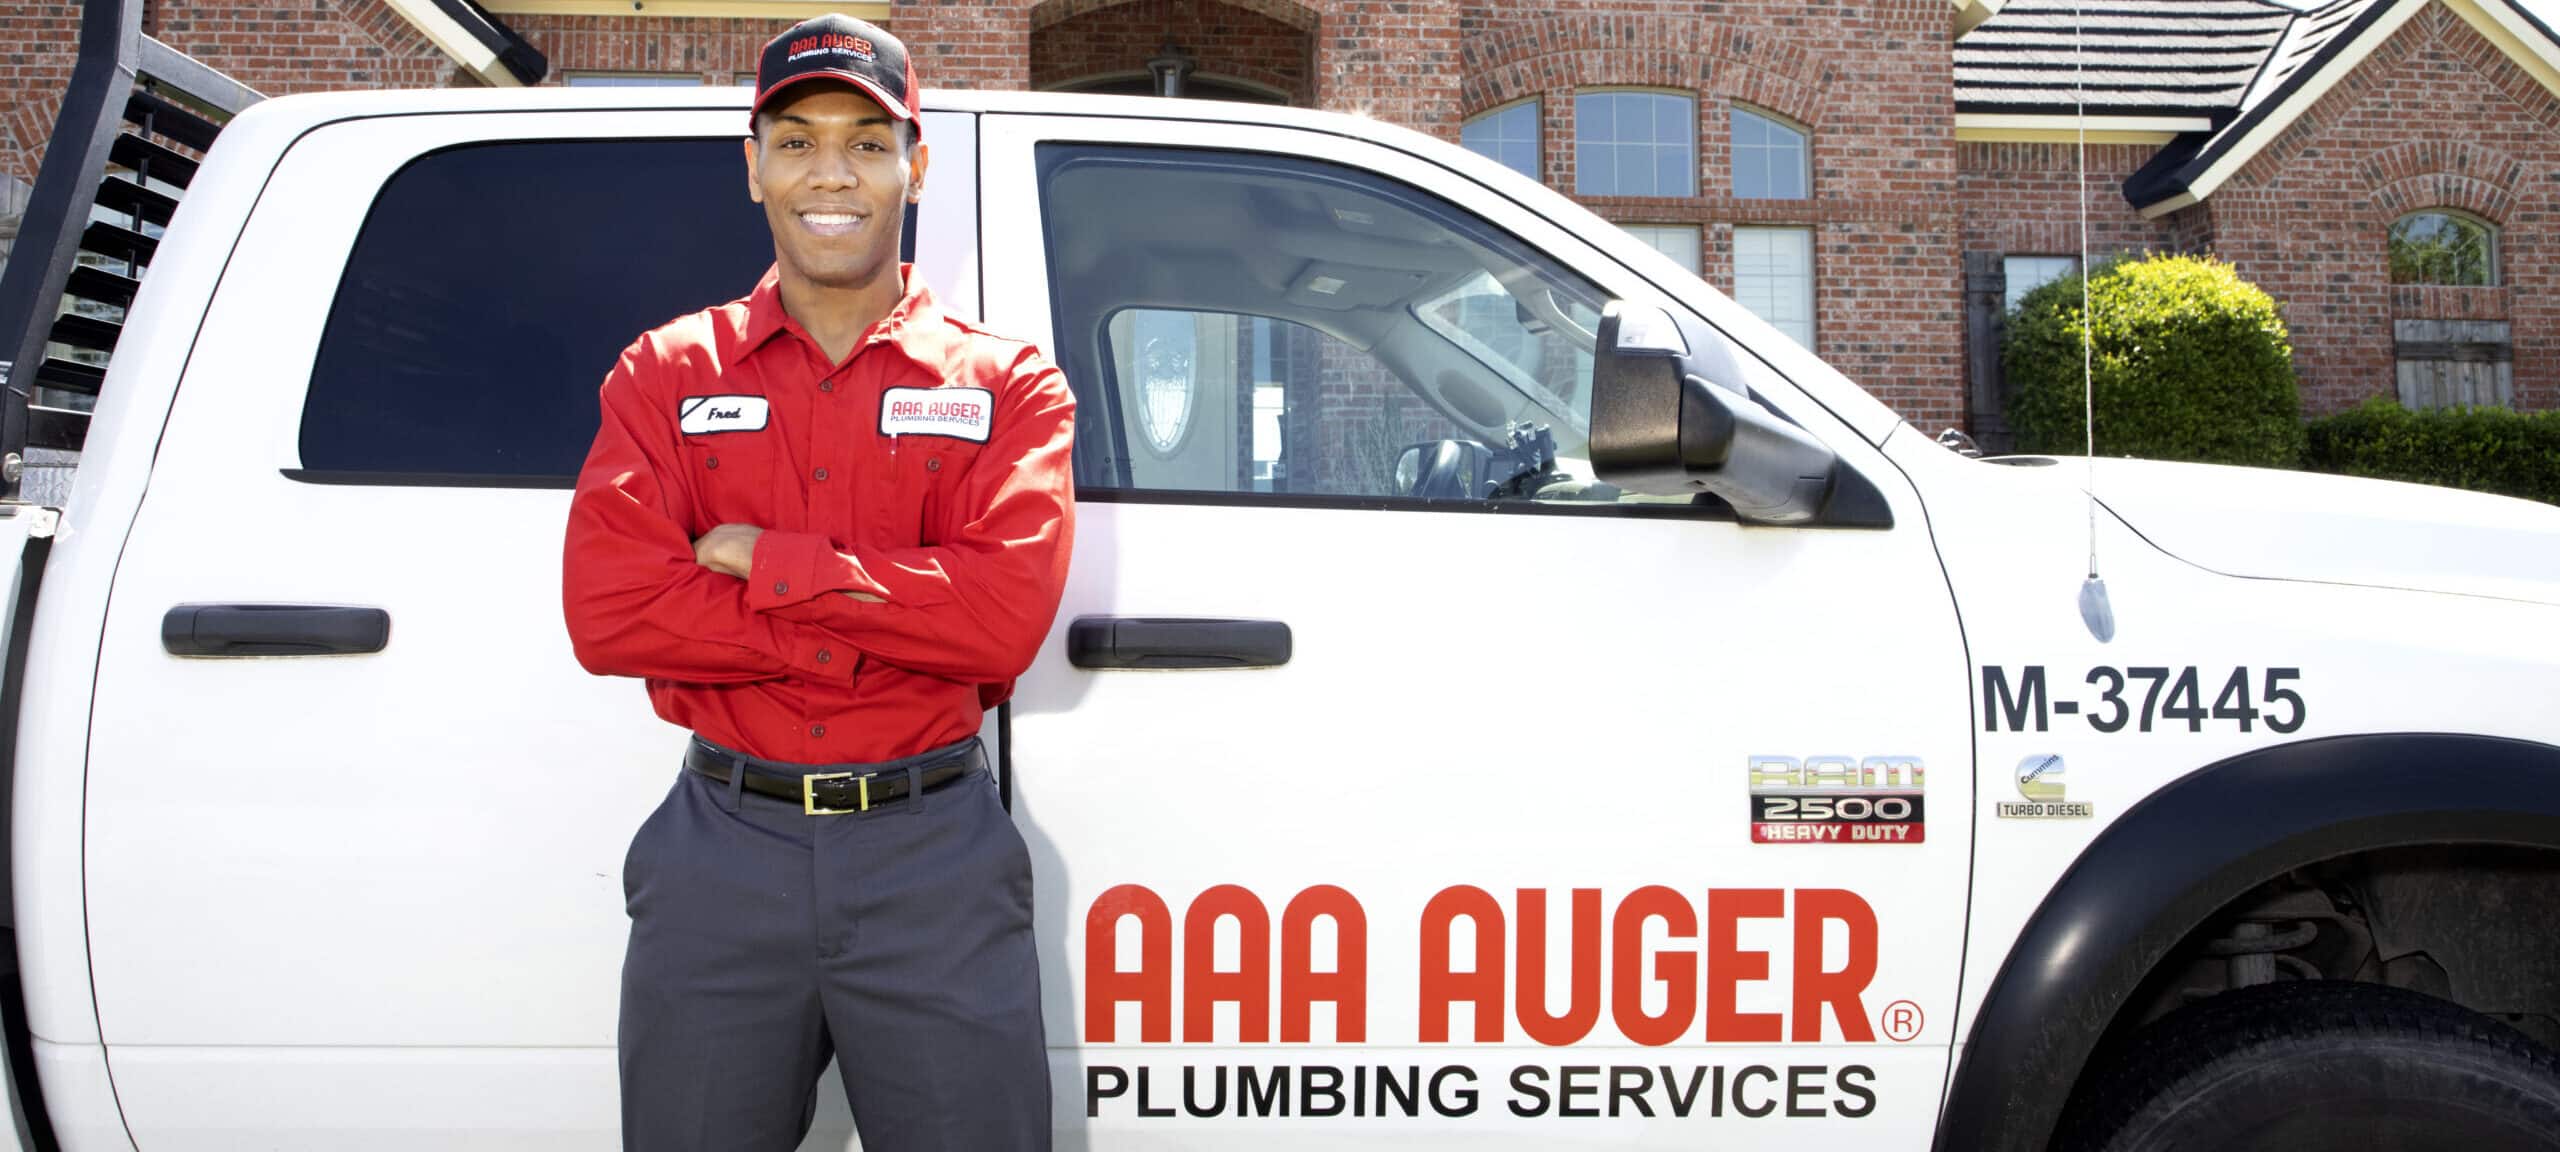 AAA AUGER Plumbing Services for Clogged Drain Dallas - Fort Worth